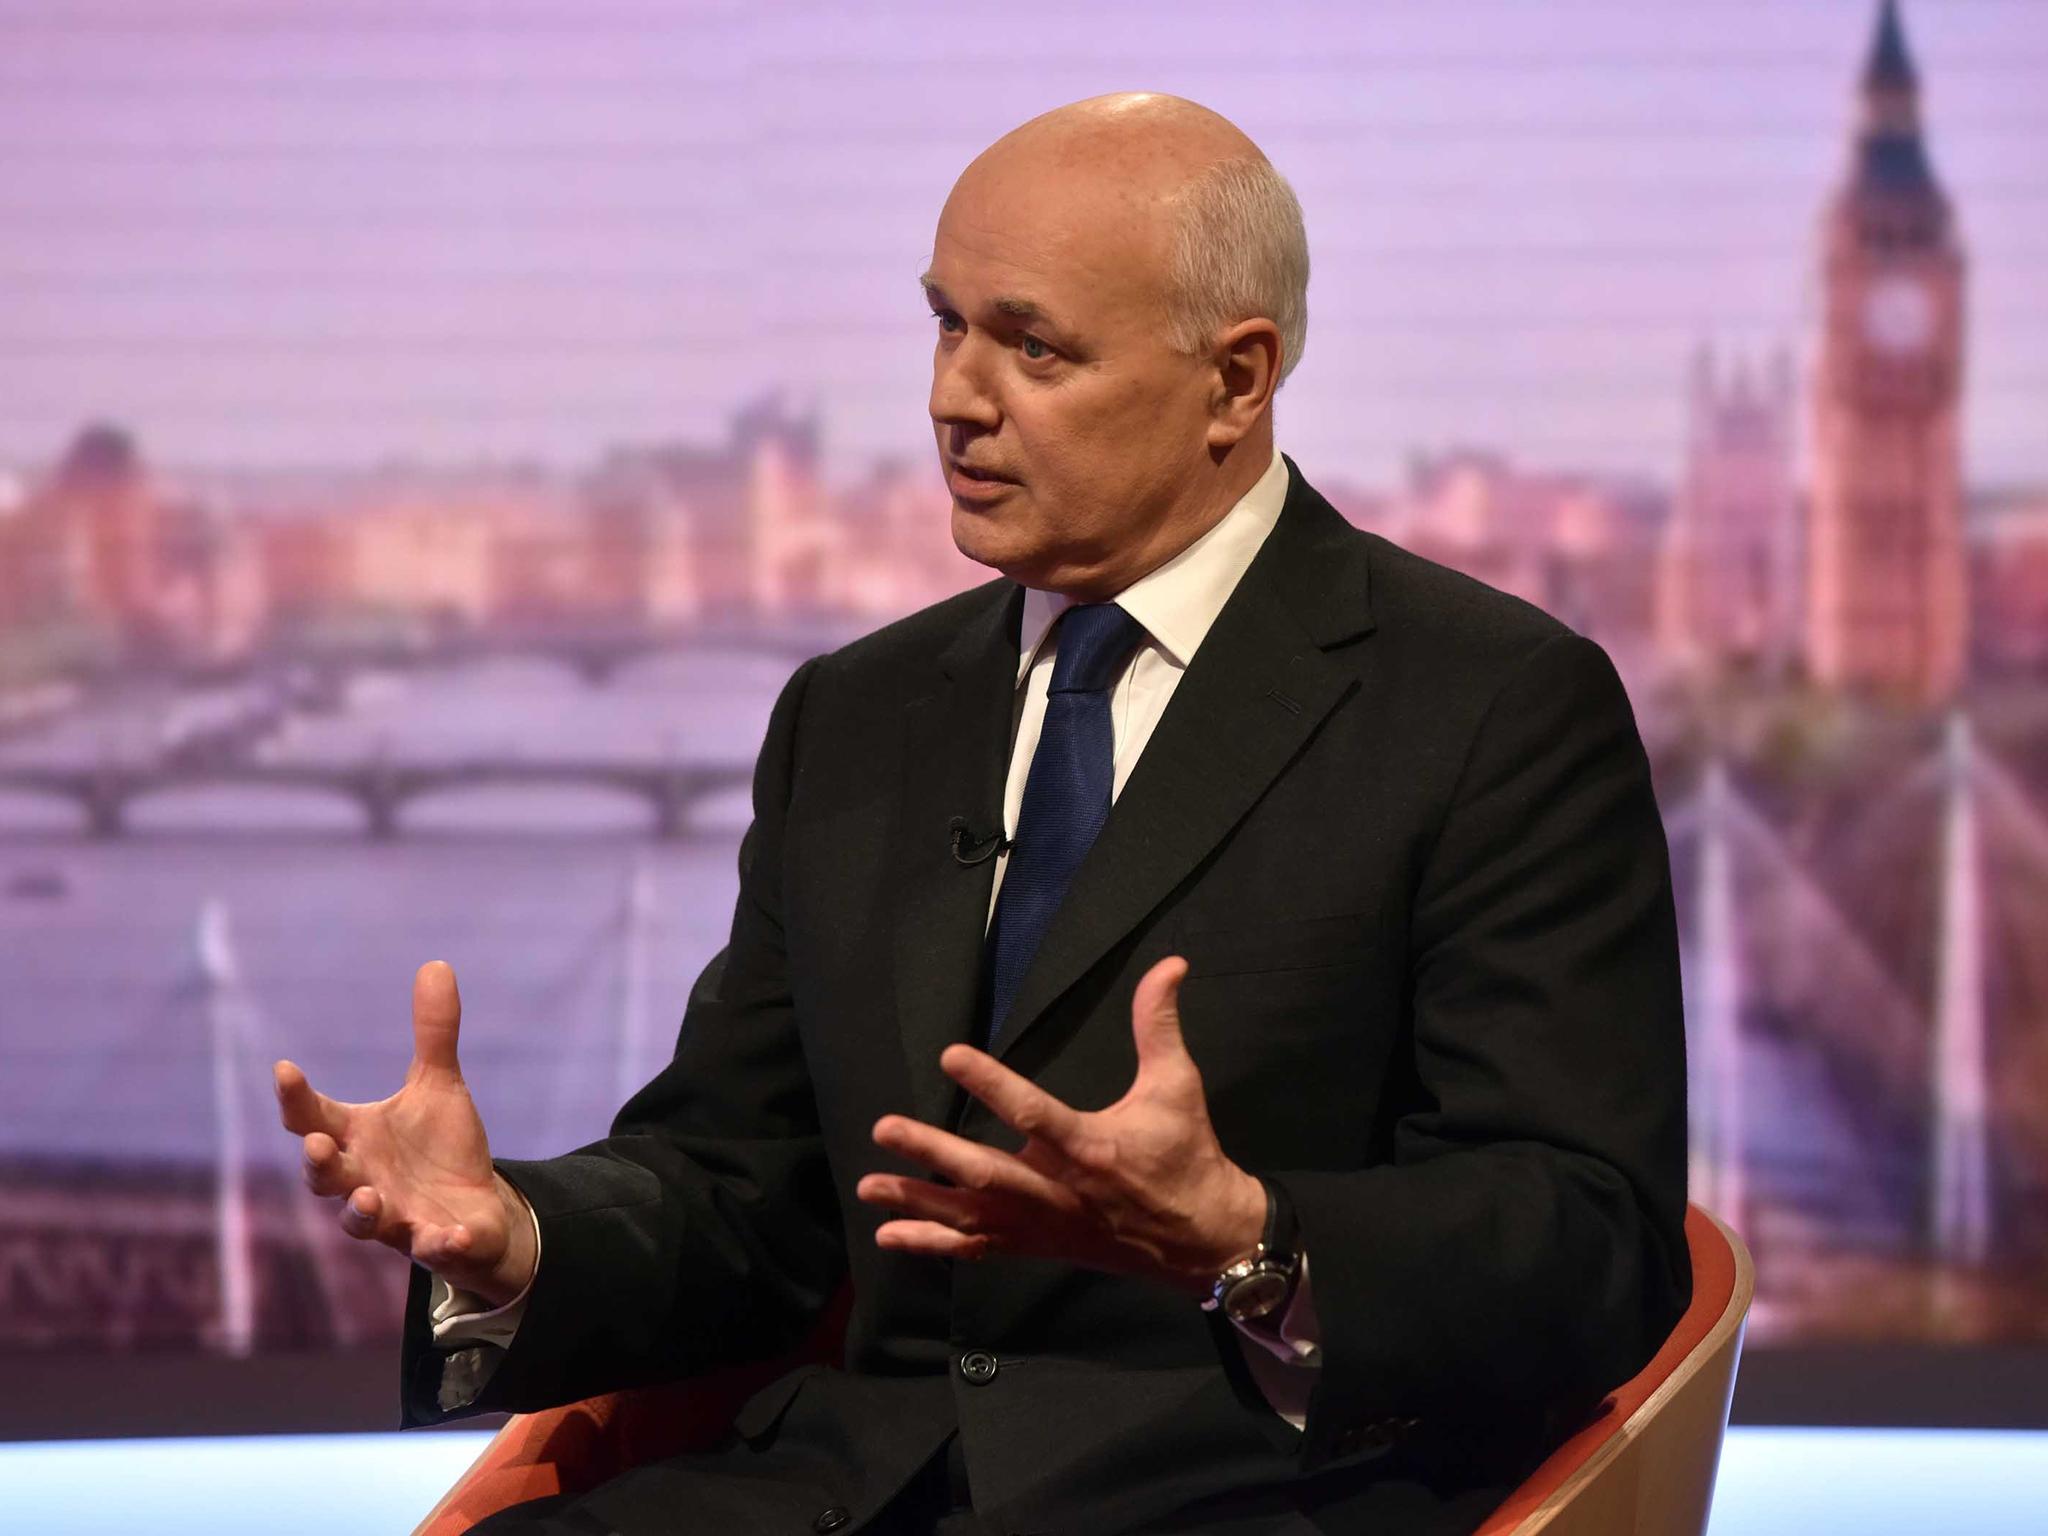 Mr Duncan Smith was appearing on BBC1's Andrew Marr Show